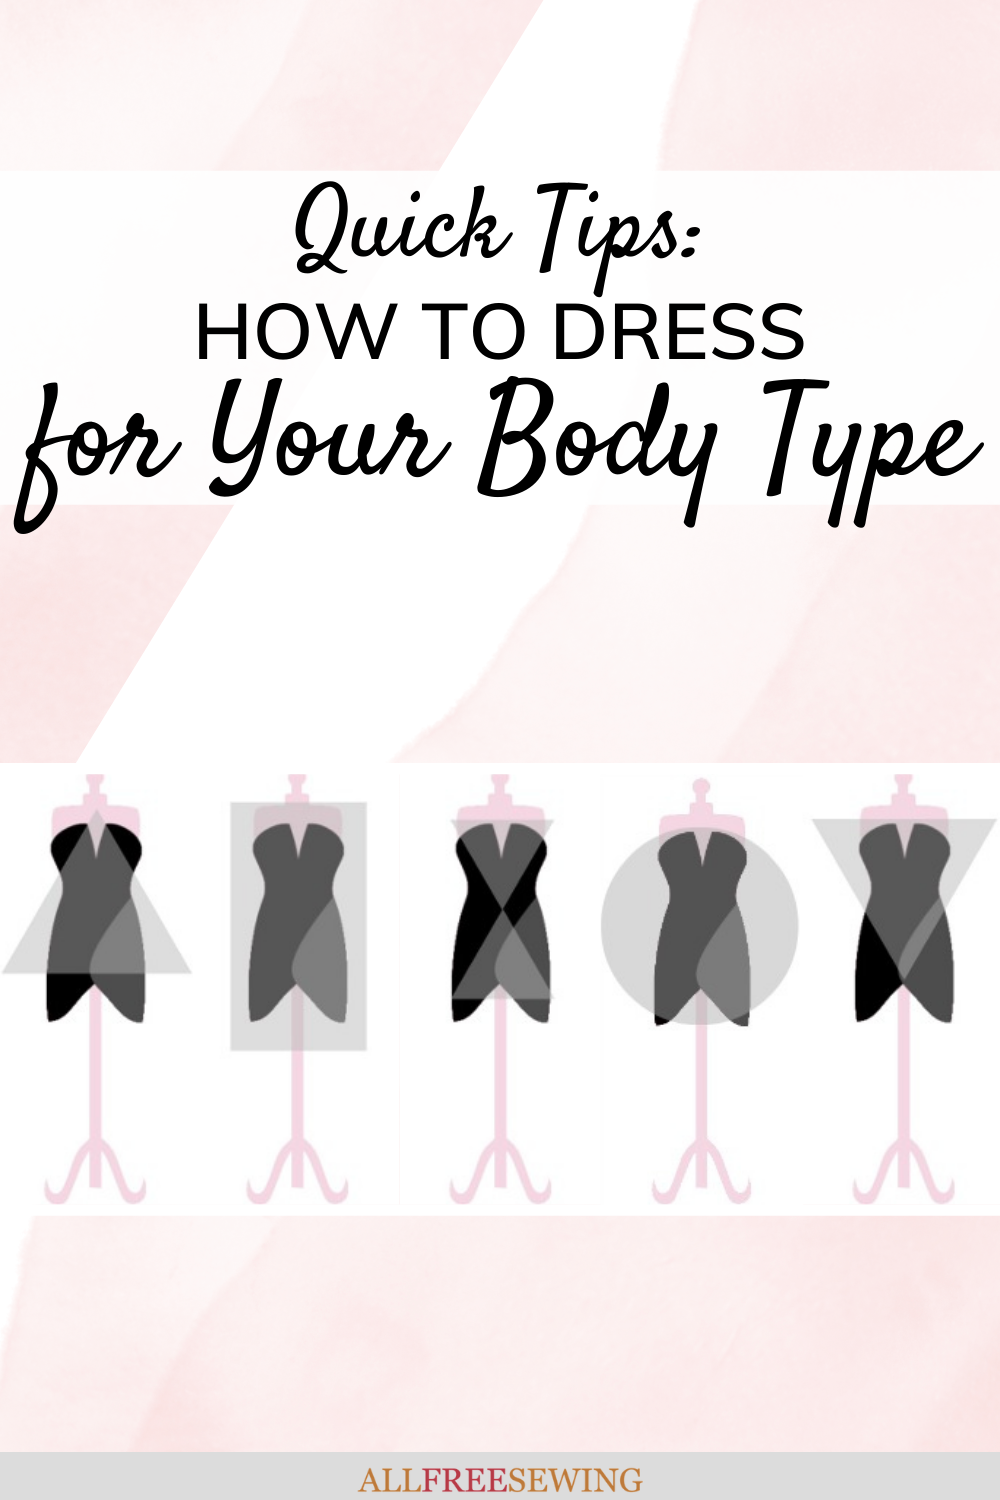 How to Choose Pants for Hourglass Body Type - Fashion for Your Body Type